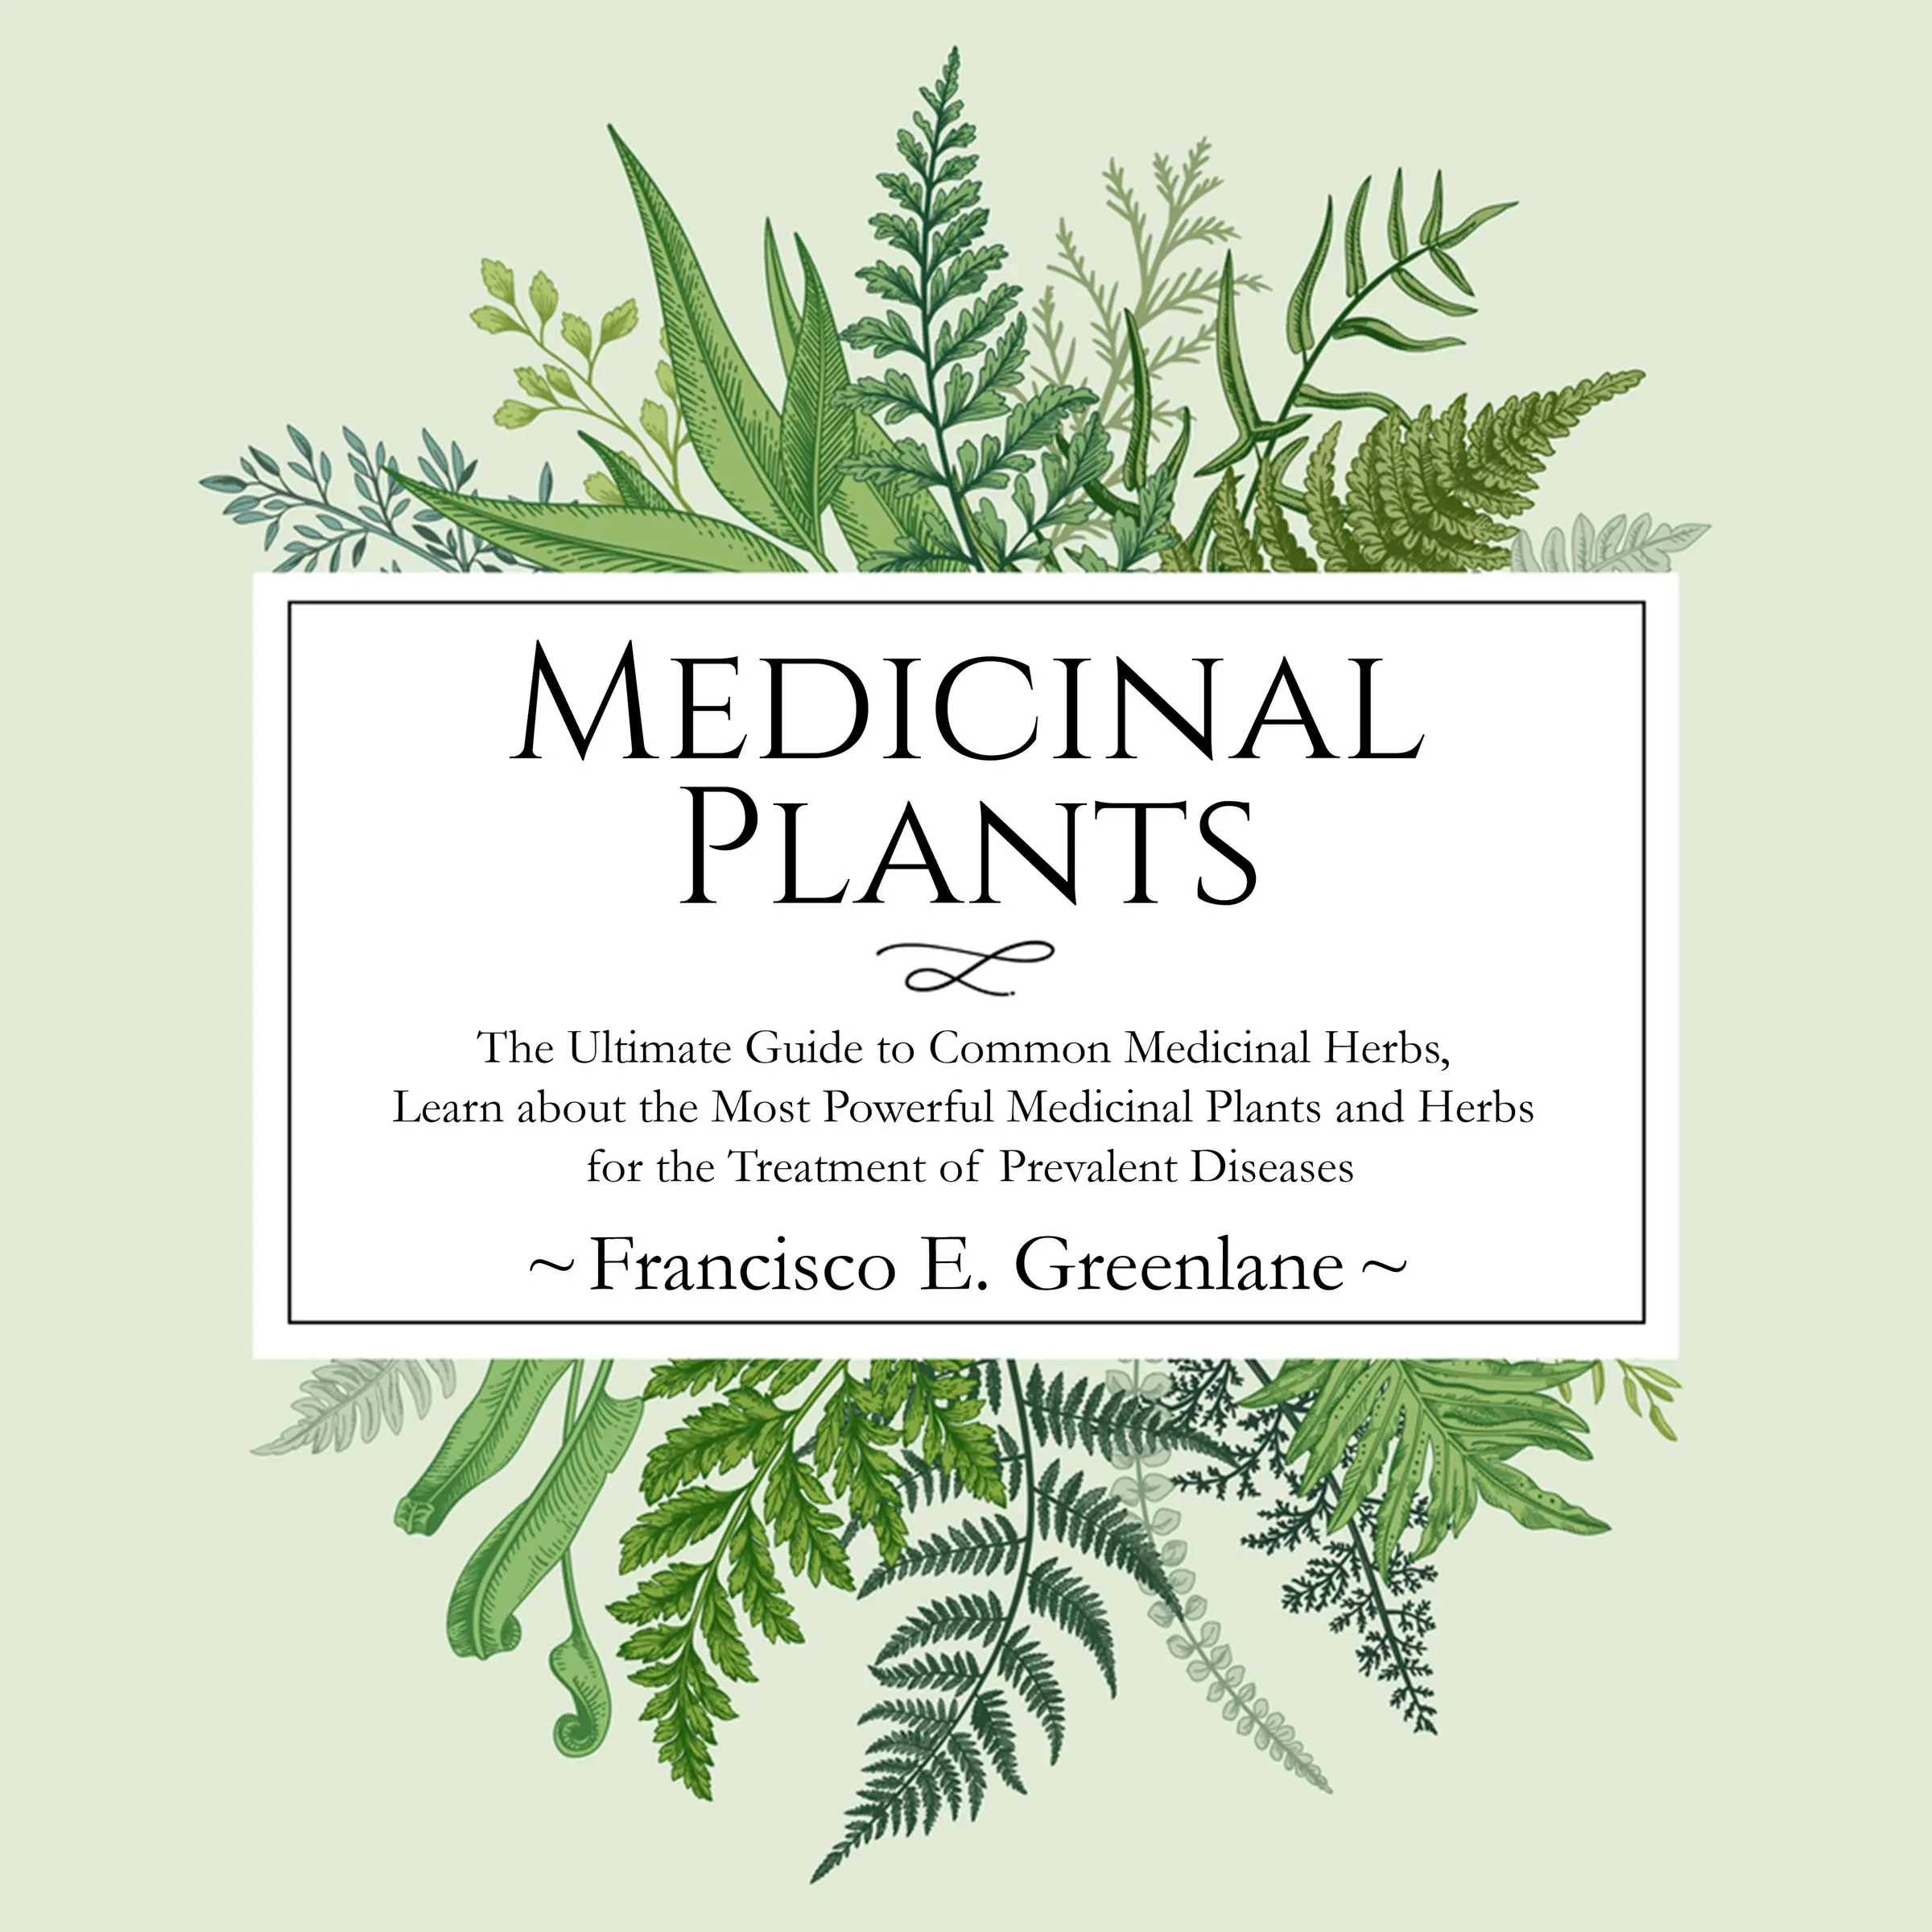 Medicinal Plants: The Ultimate Guide to Common Medicinal Herbs, Learn the Most Powerful Medicinal Plants and Herbs for the Treatment of Prevalent Diseases Audiobook by Francisco E. Greenlane